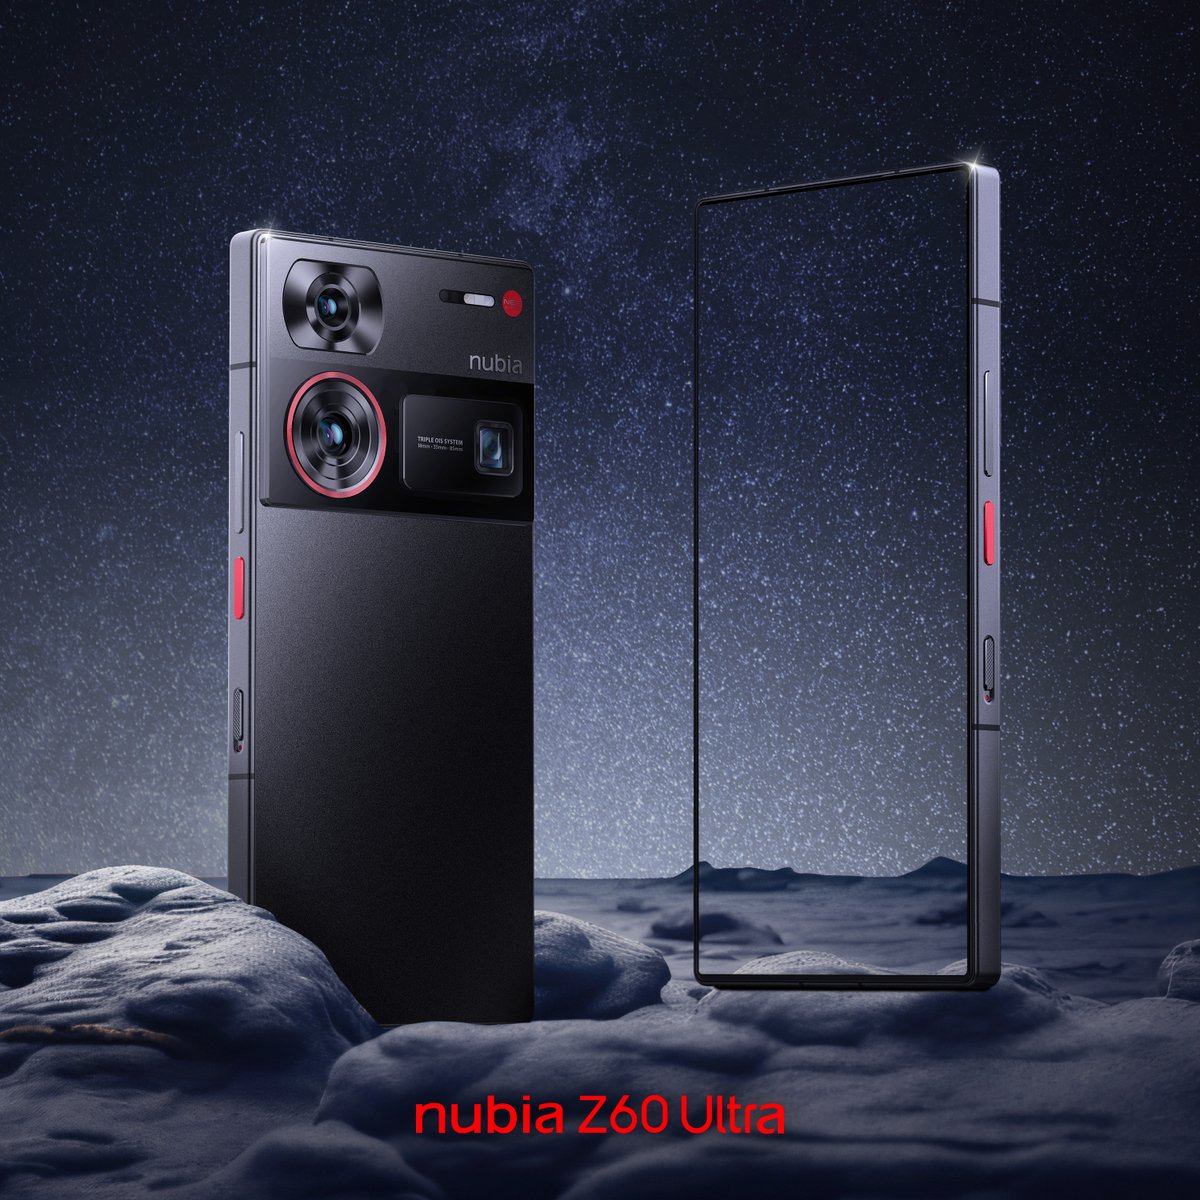 📱✨Unleash Your Creativity with #nubiaZ60Ultra! Featuring the new UDC screen and the 5th generation of UDC technology, it dazzles with vibrant displays and natural selfies. 🤳💫 Find more robust features👉 bit.ly/4abpfaE